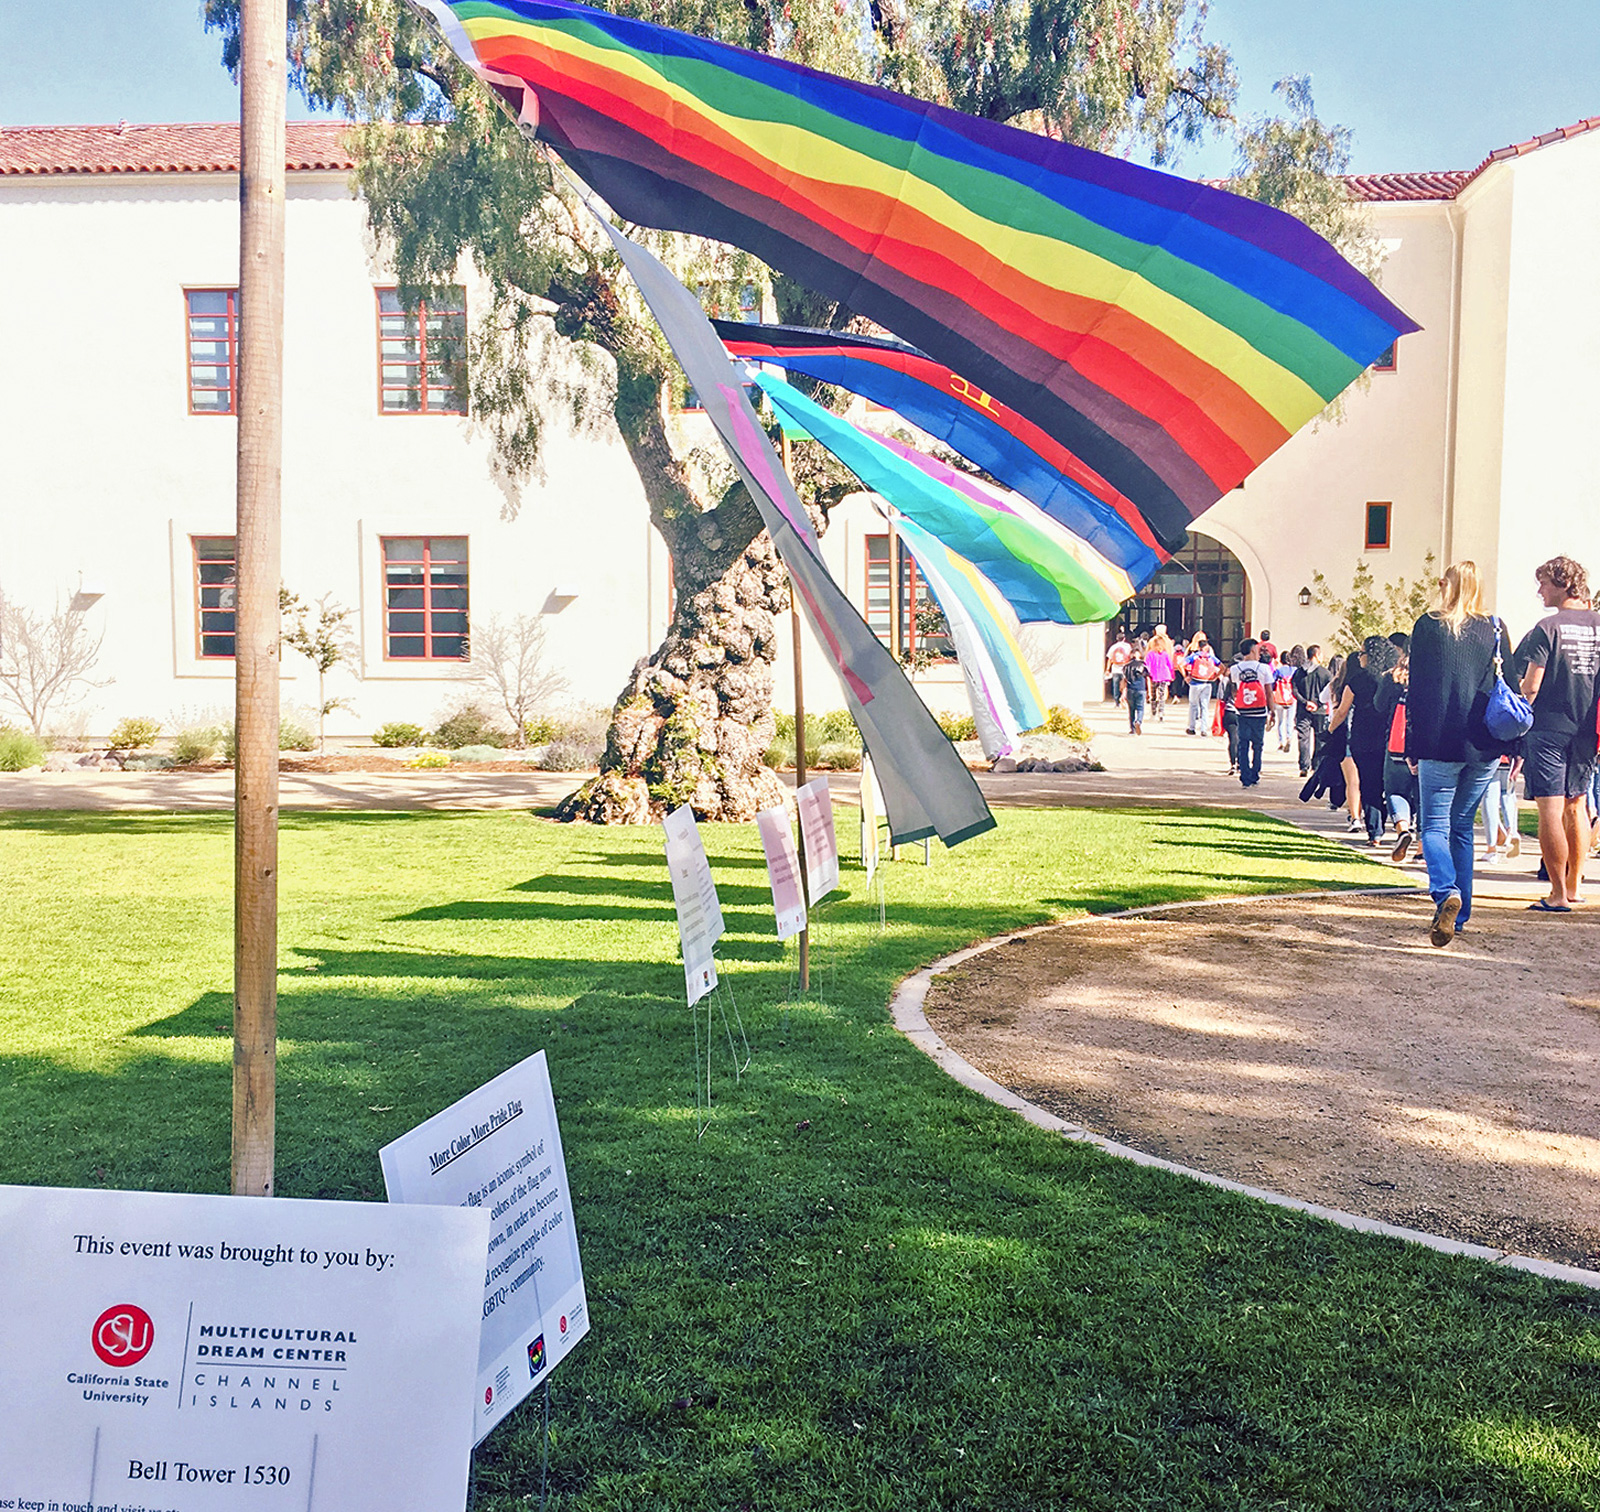 CSUCI’s Multicultural Dream Center provides programs and services for students to have authentic conversations that acknowledge their rich life stories in a safe, community space.